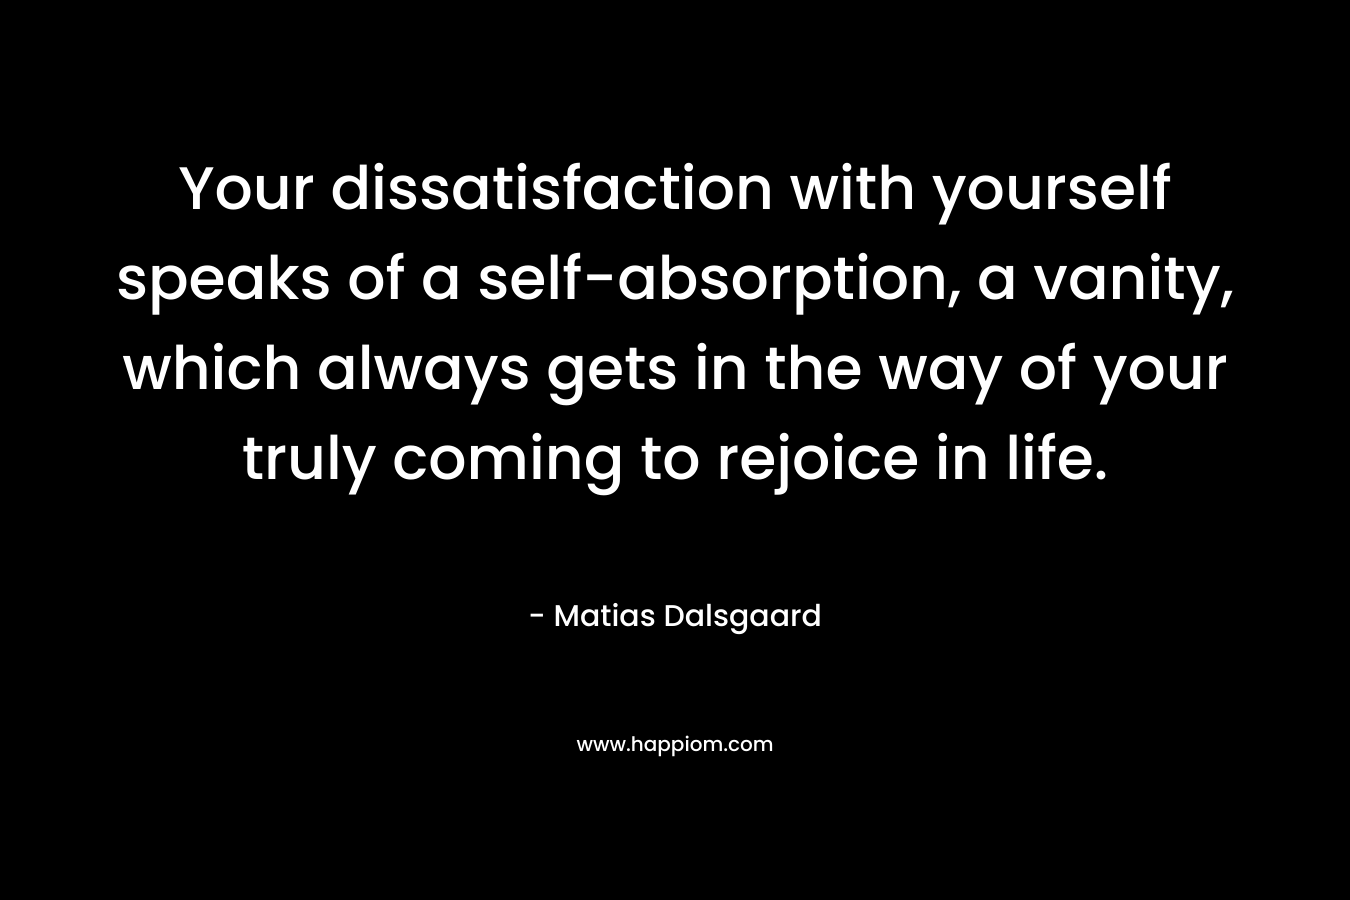 Your dissatisfaction with yourself speaks of a self-absorption, a vanity, which always gets in the way of your truly coming to rejoice in life.